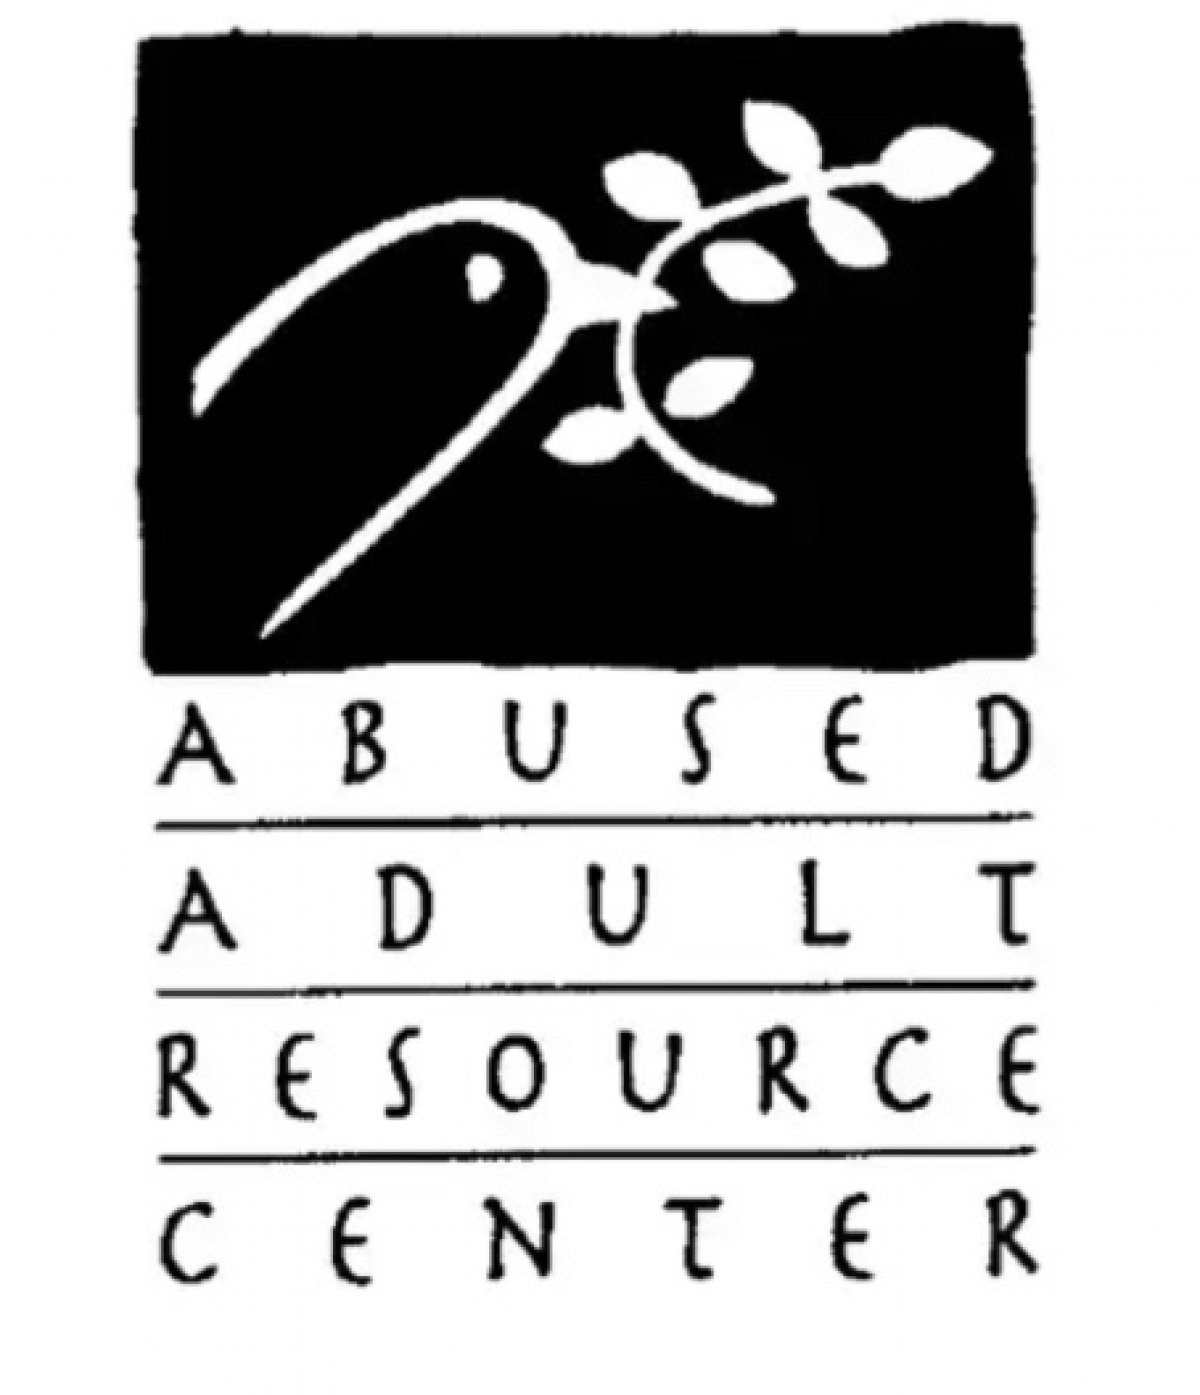 Abused Adult Resource Center eCards